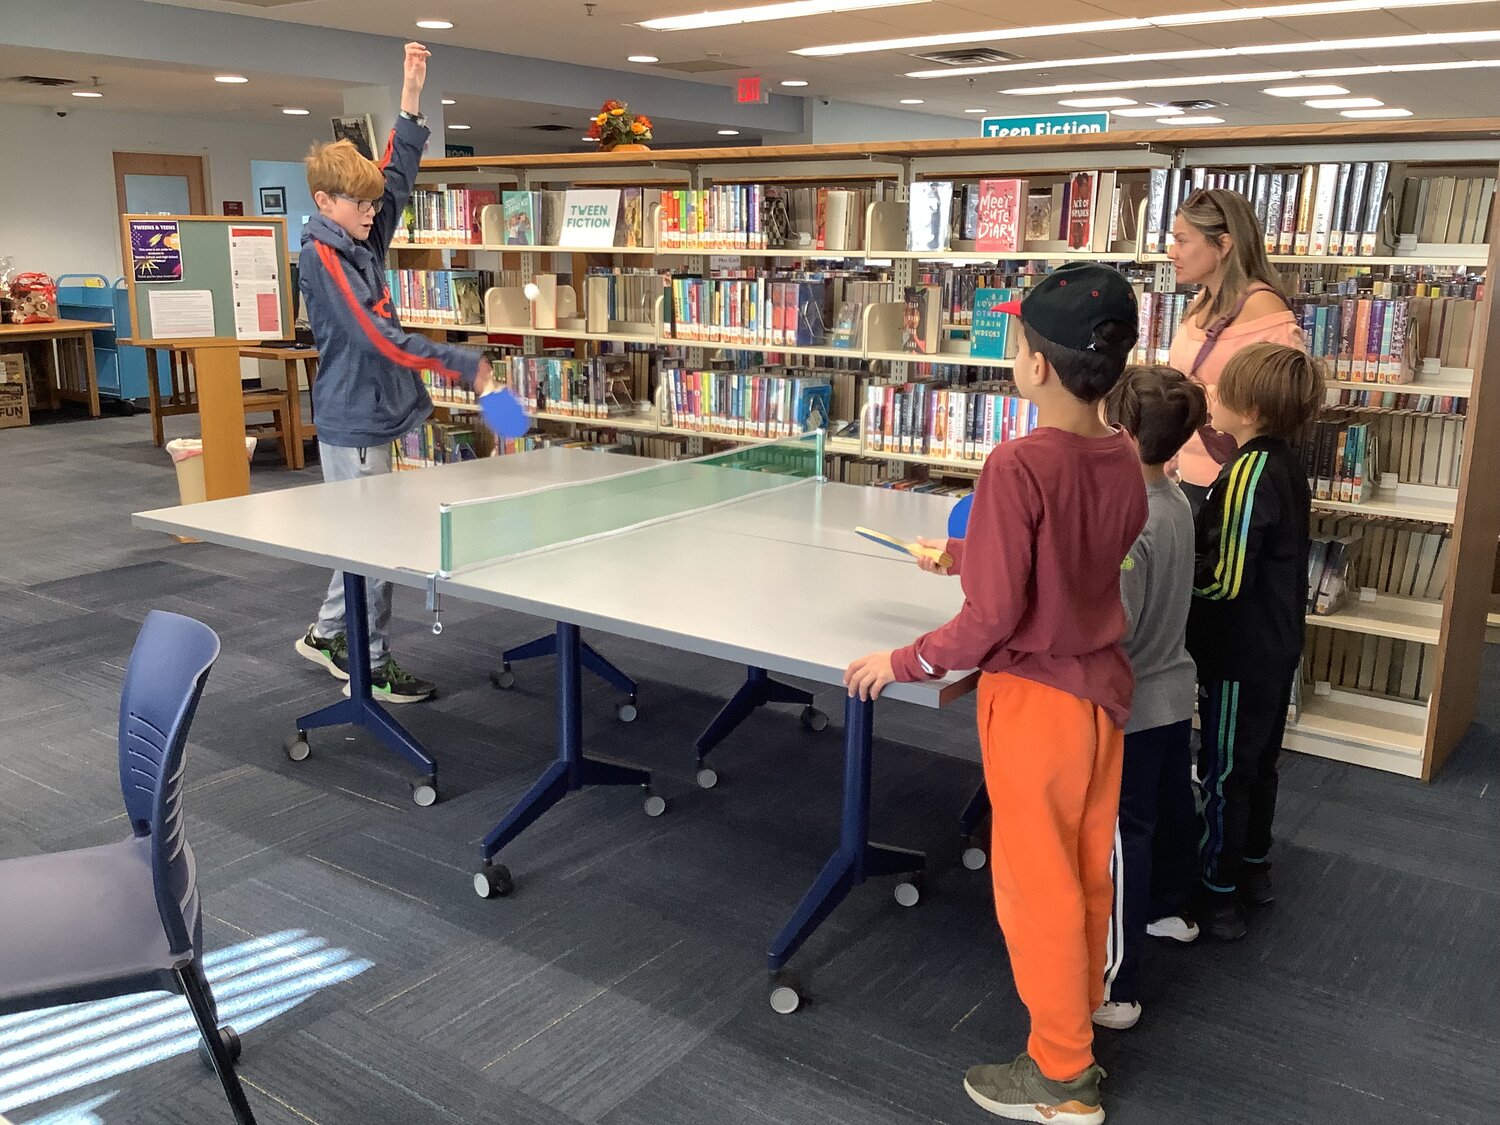 Island Park library patrons enjoyed the fun and competitive environment